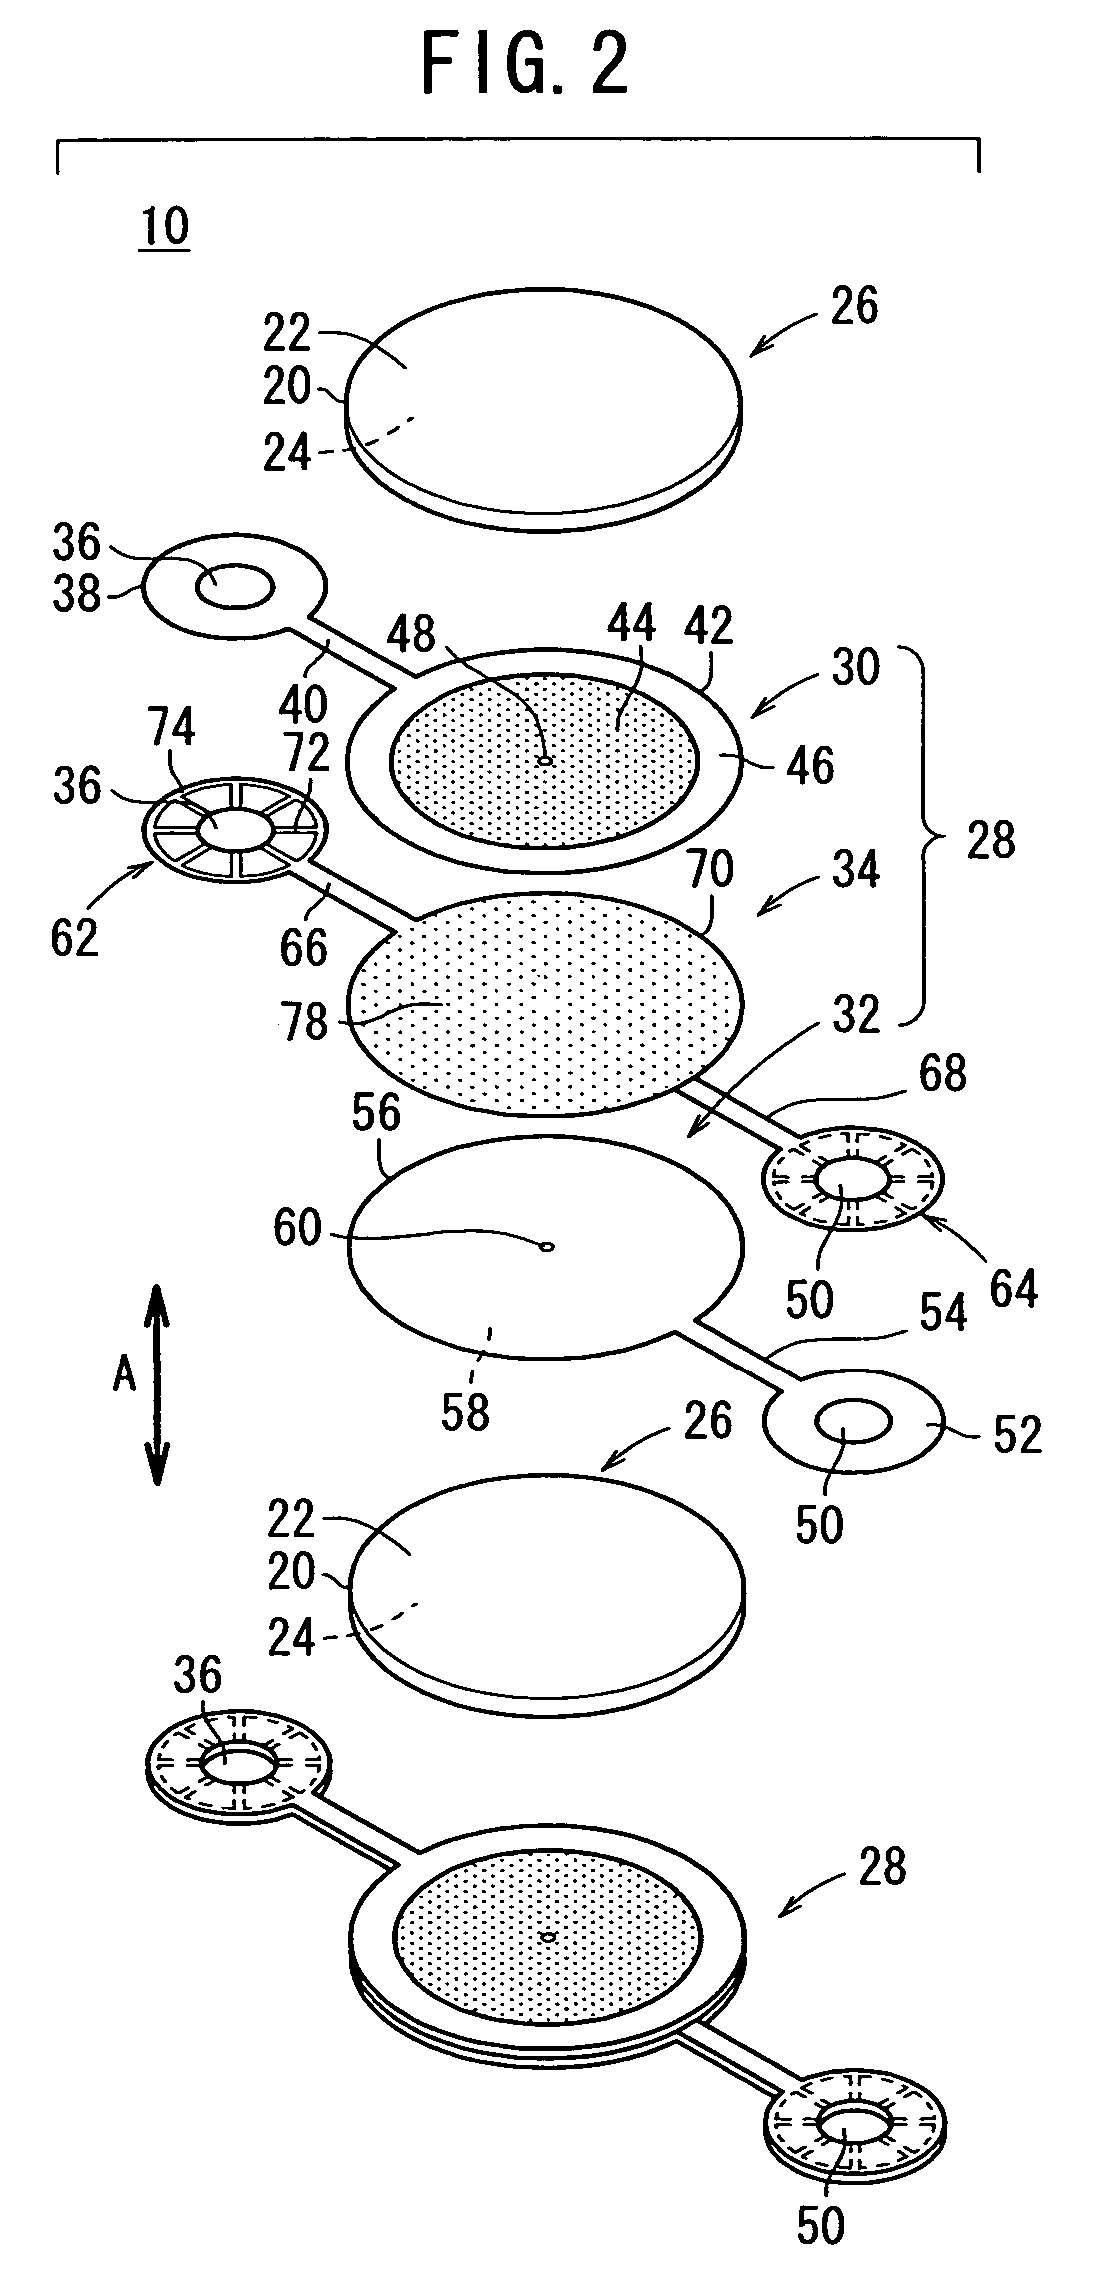 Fuel cell and fuel cell stack with pressure chambers